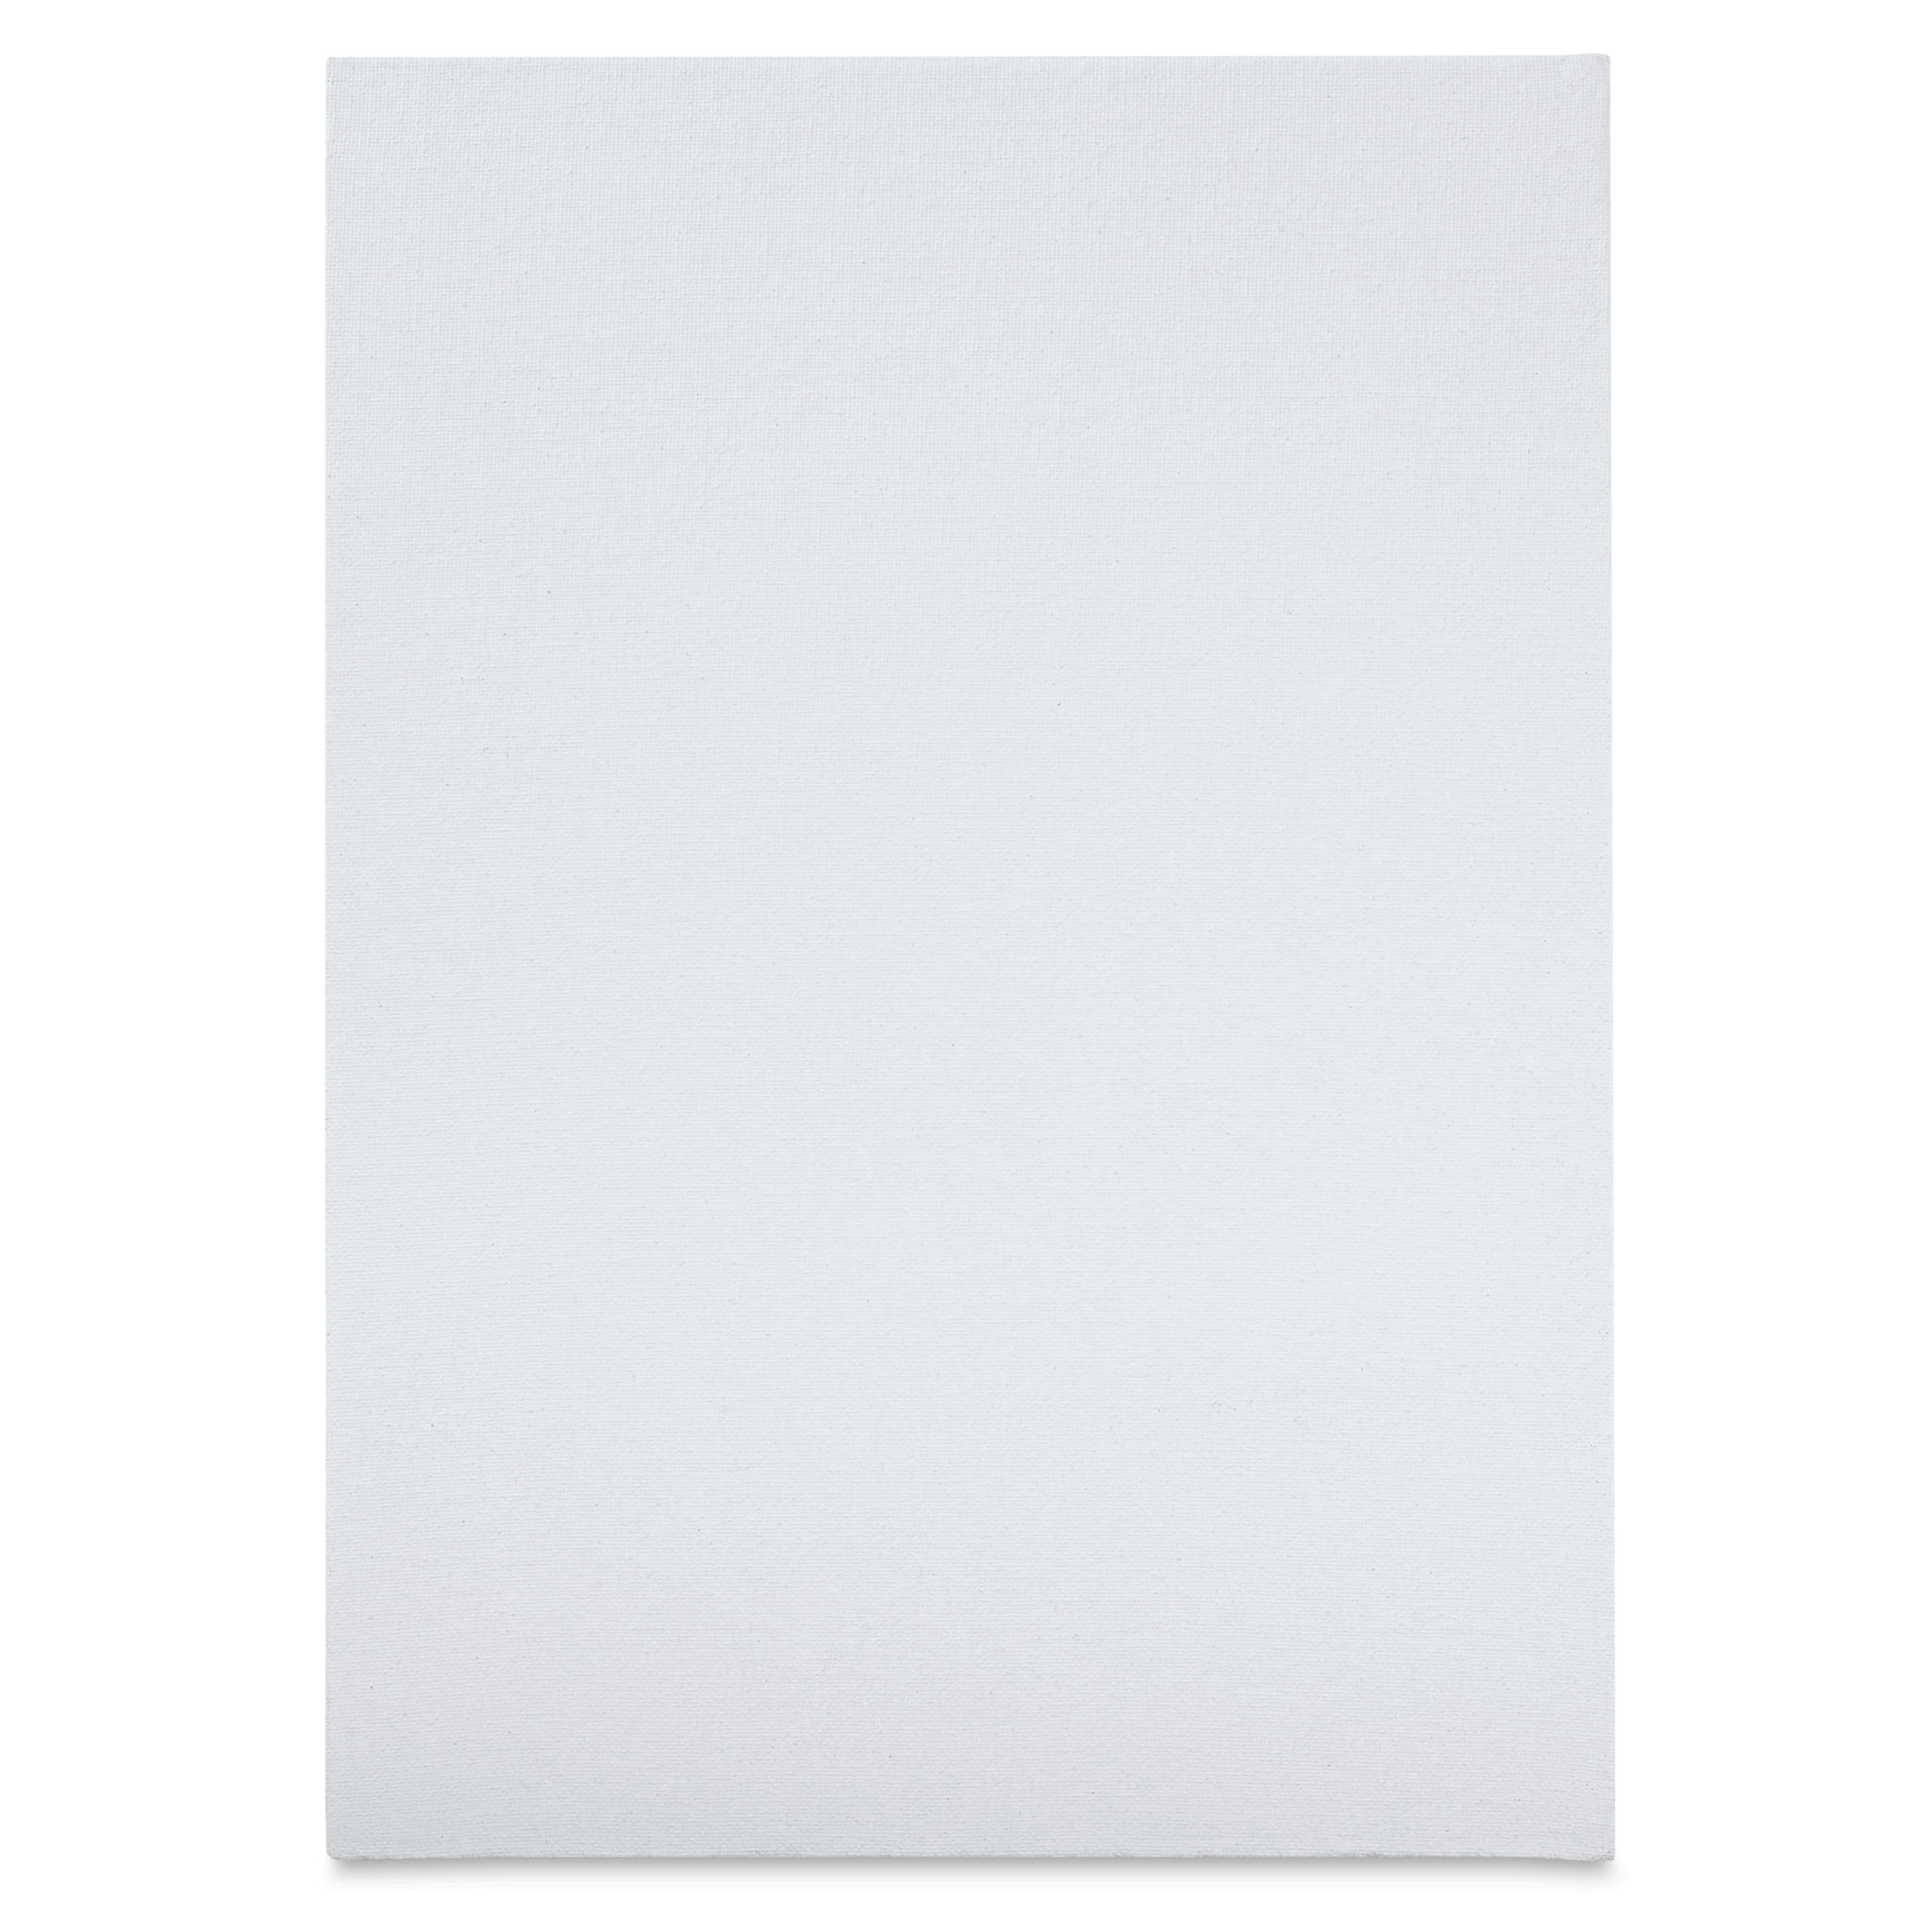 Mini Stretched Canvas, 10.2x10.2cm - Pack of 14 —